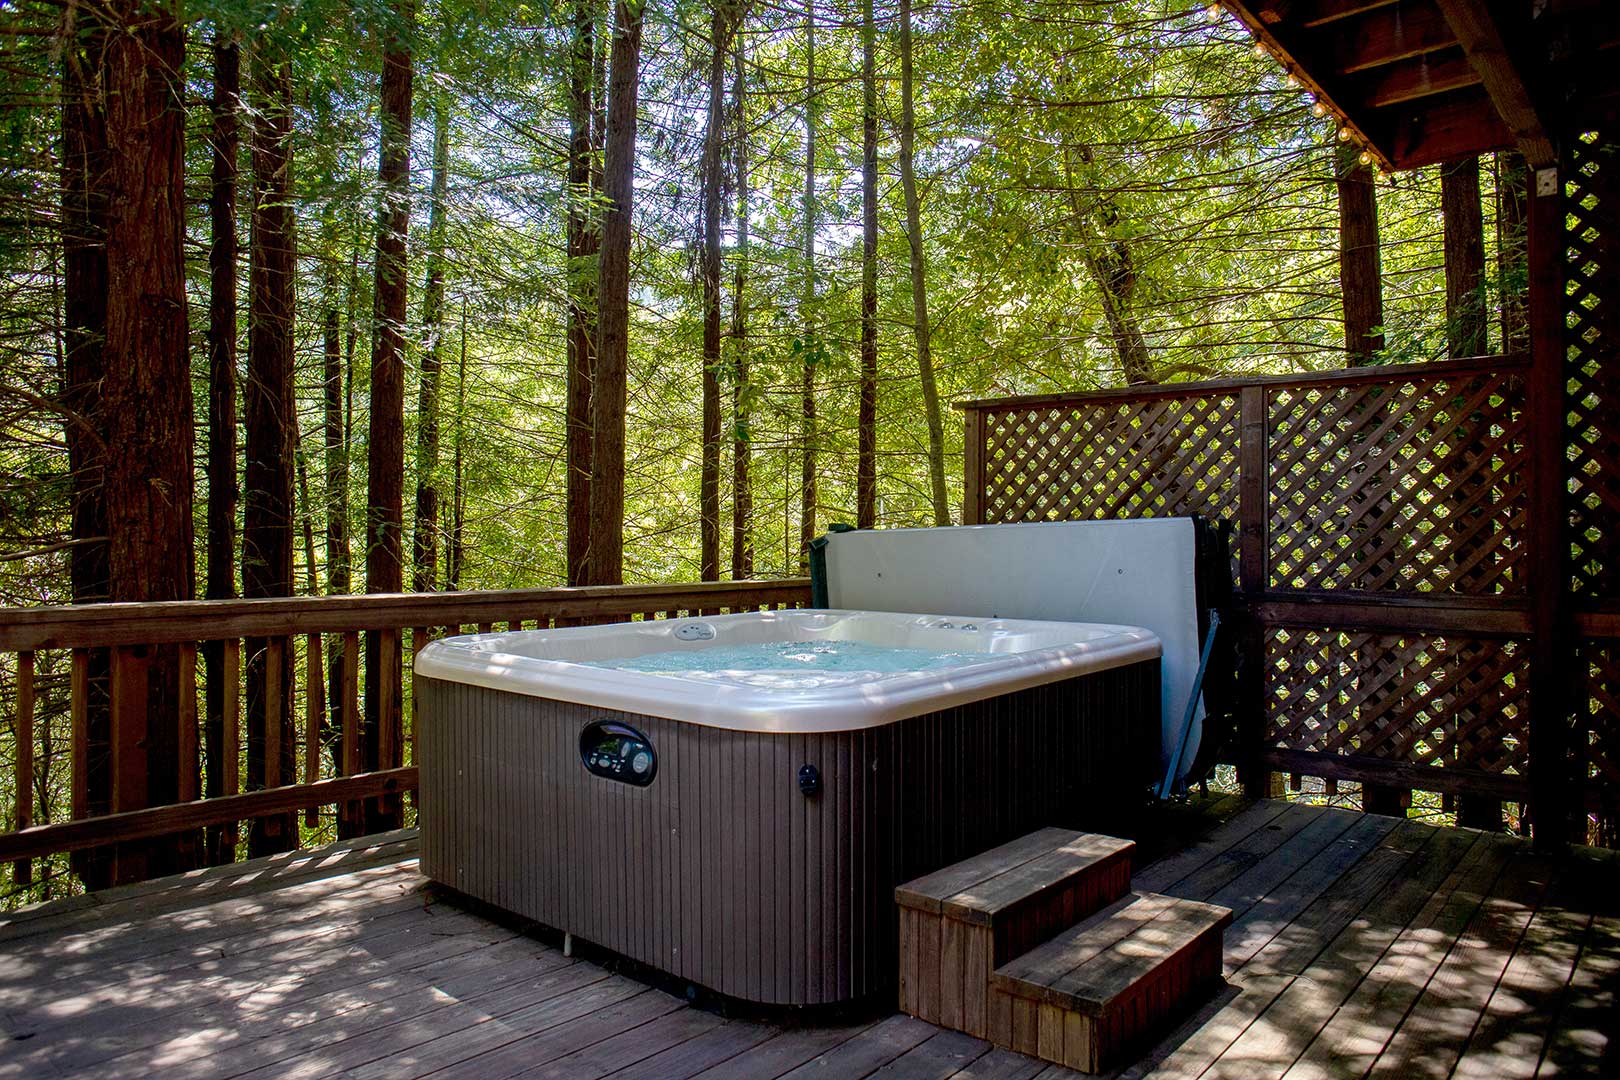 The 6 person hot tub on the lower deck looks up to redwoods!